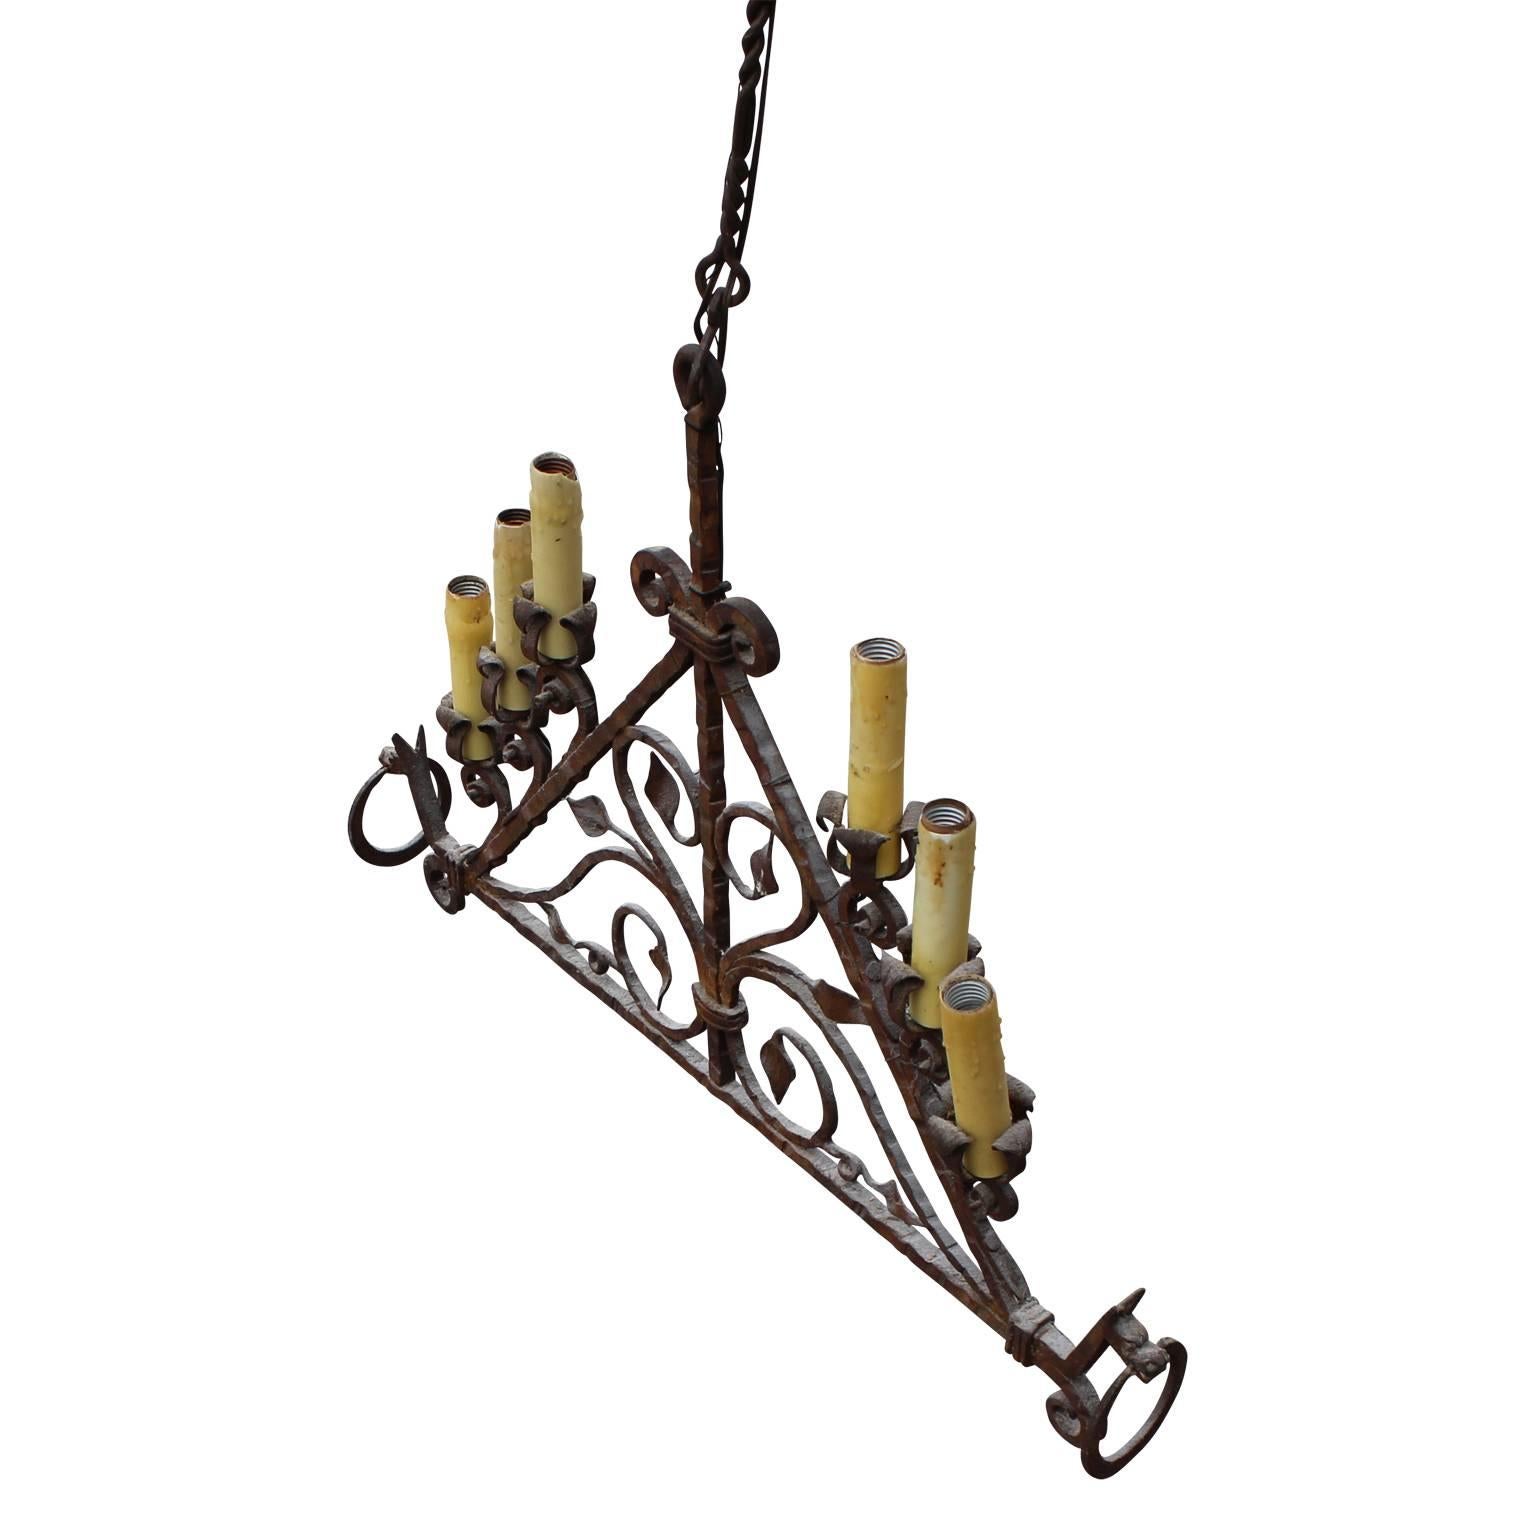 Gorgeous 19th century wrought iron horse hanging chandelier or candelabra with six sockets. 

Total height with cord: 58 inches.